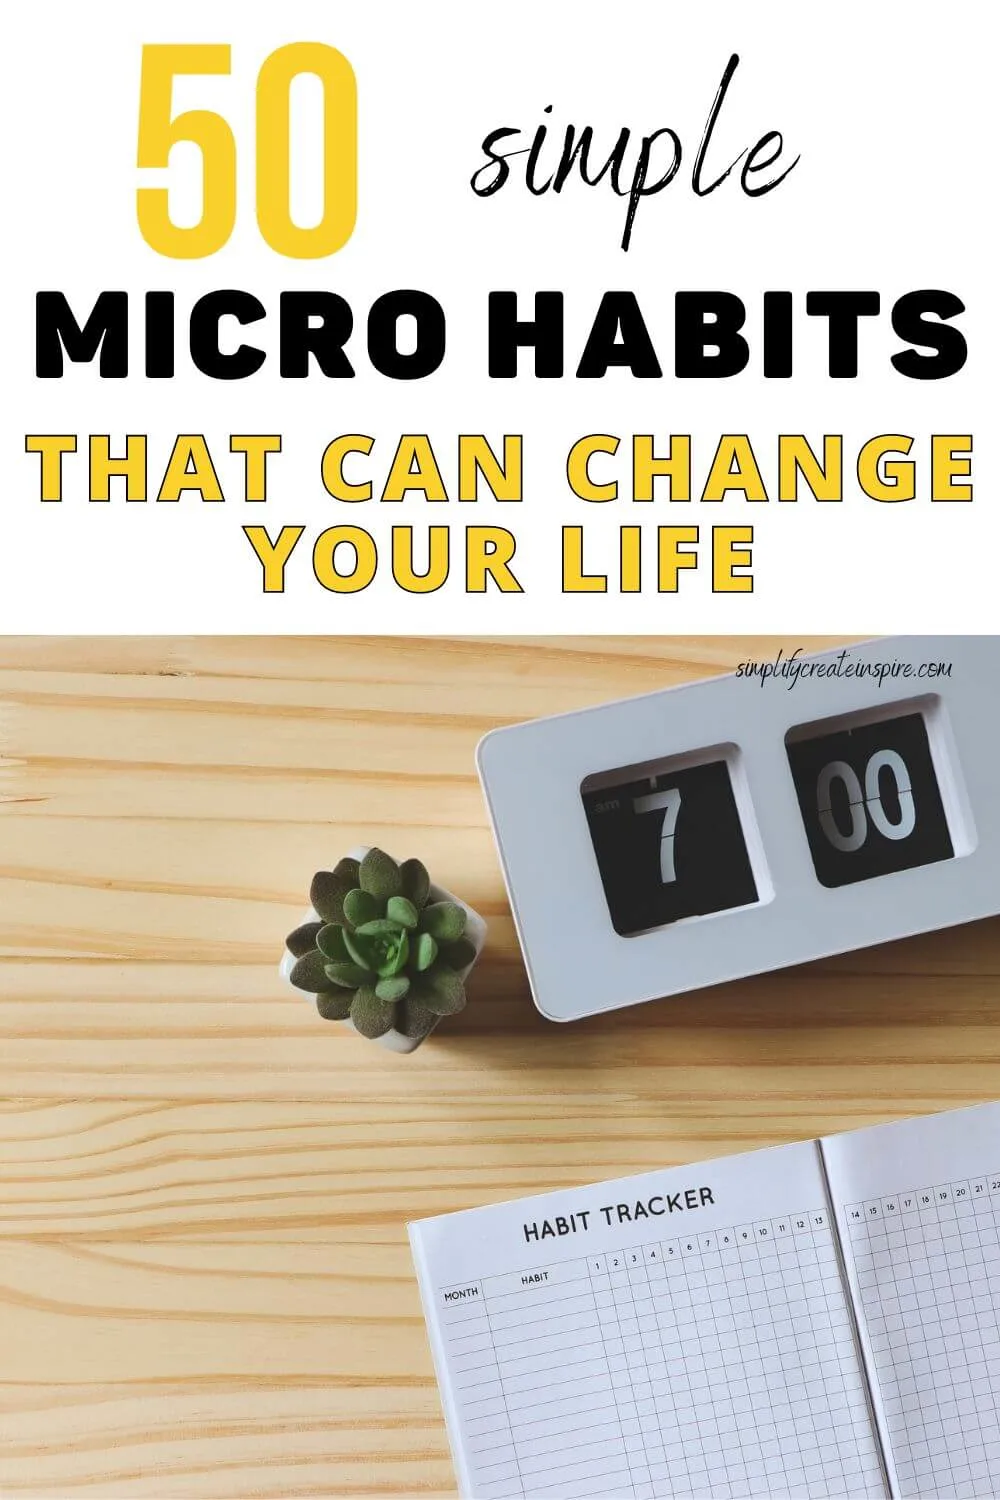 50 simple micro habits that can change your life.